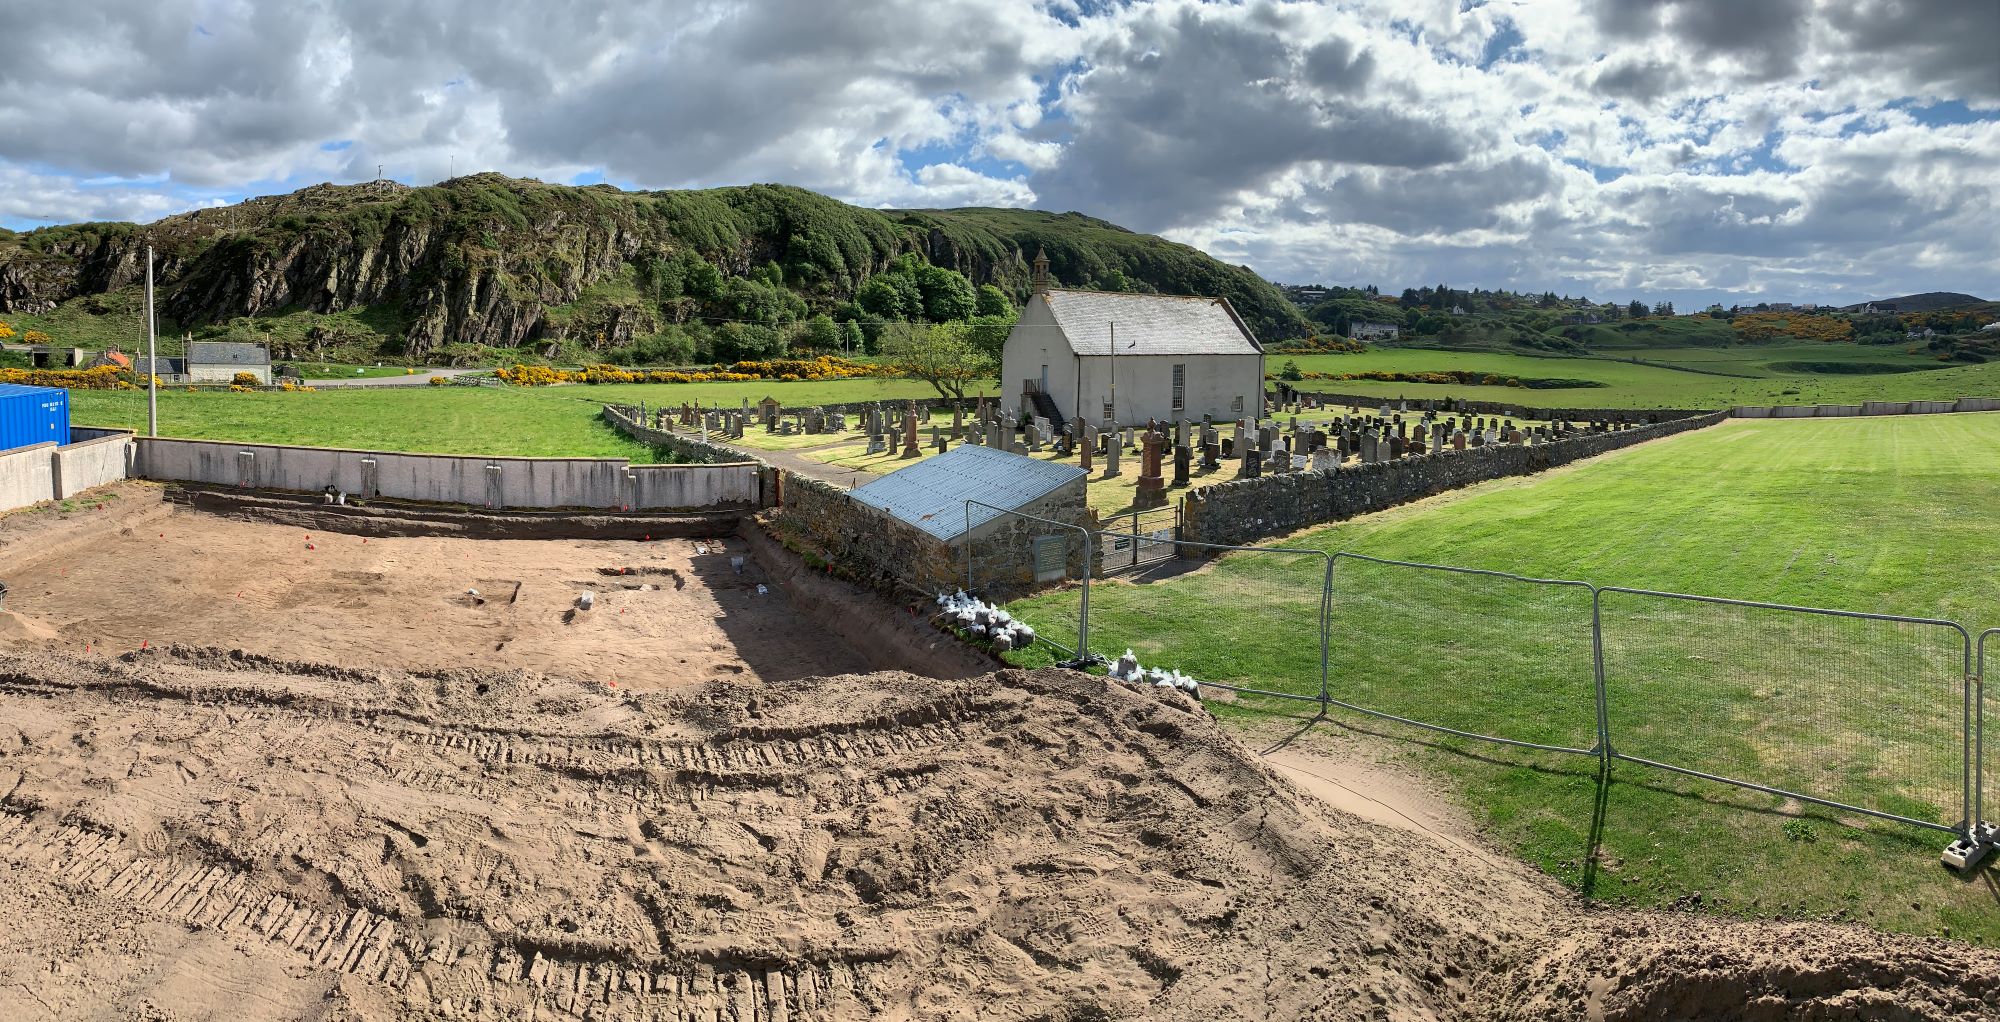 The Buried Past of Strathnaver Museum: An early Christian craftworking site?